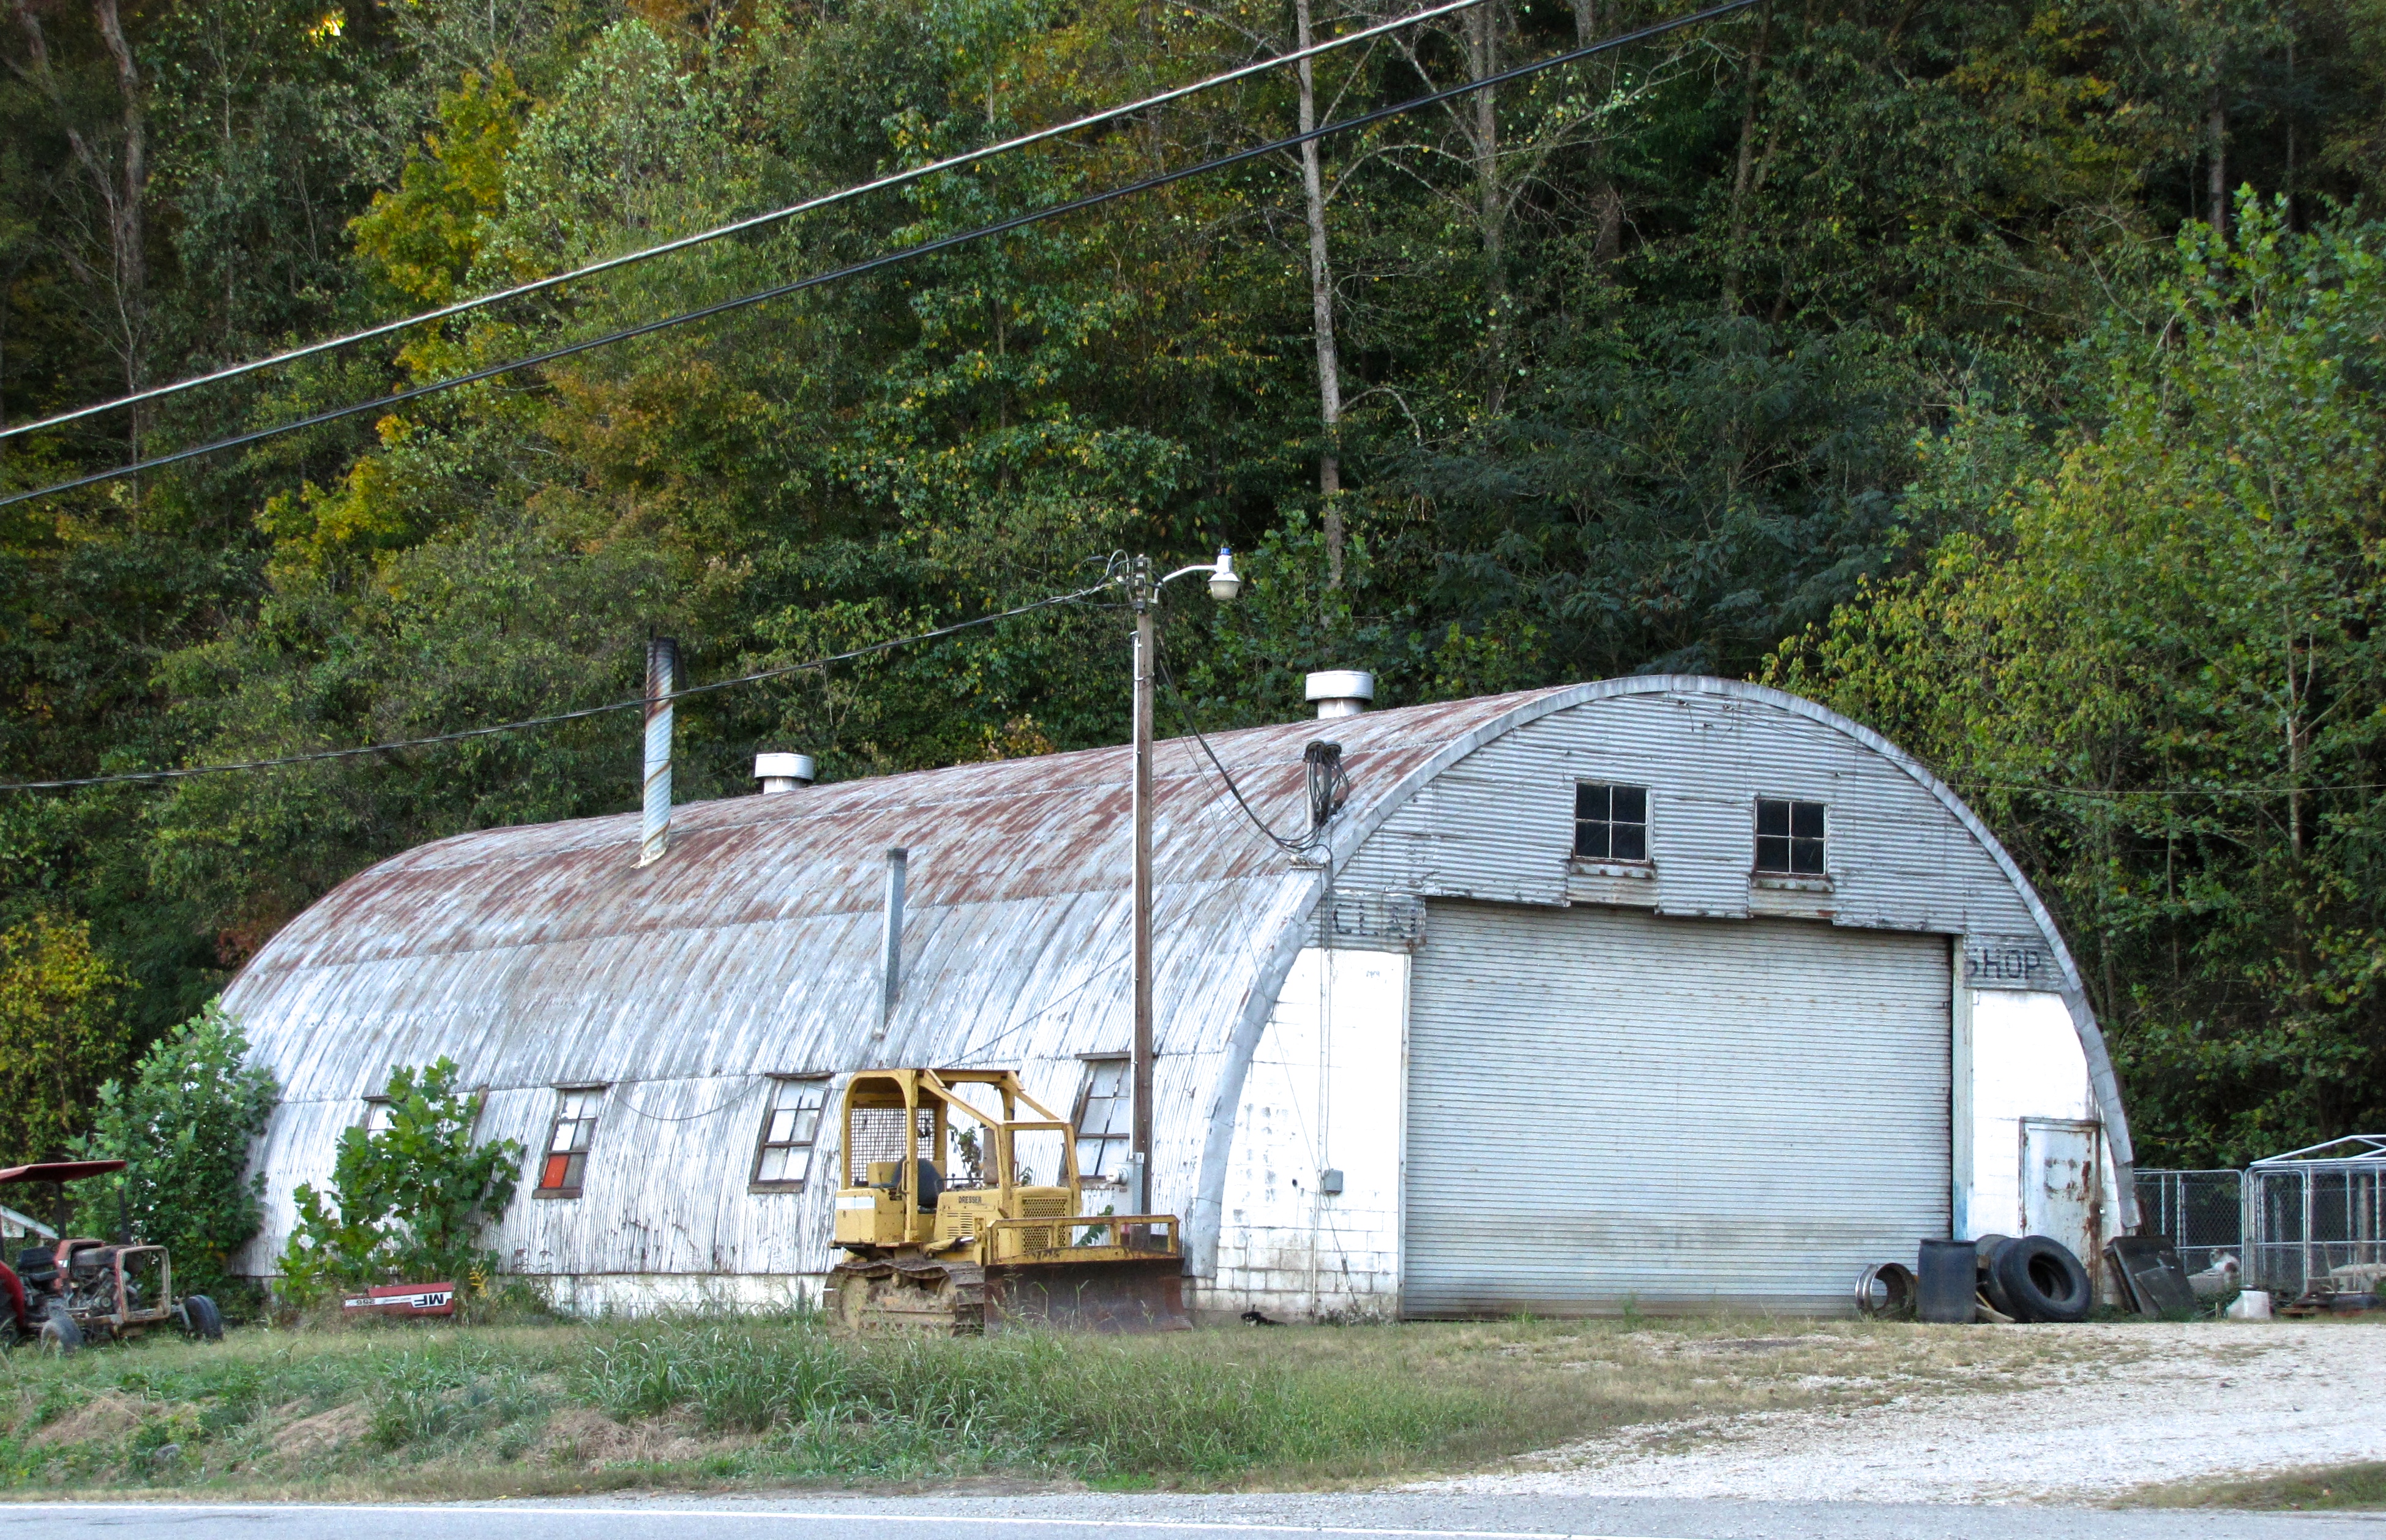 quonset hut in Foxworth, MS